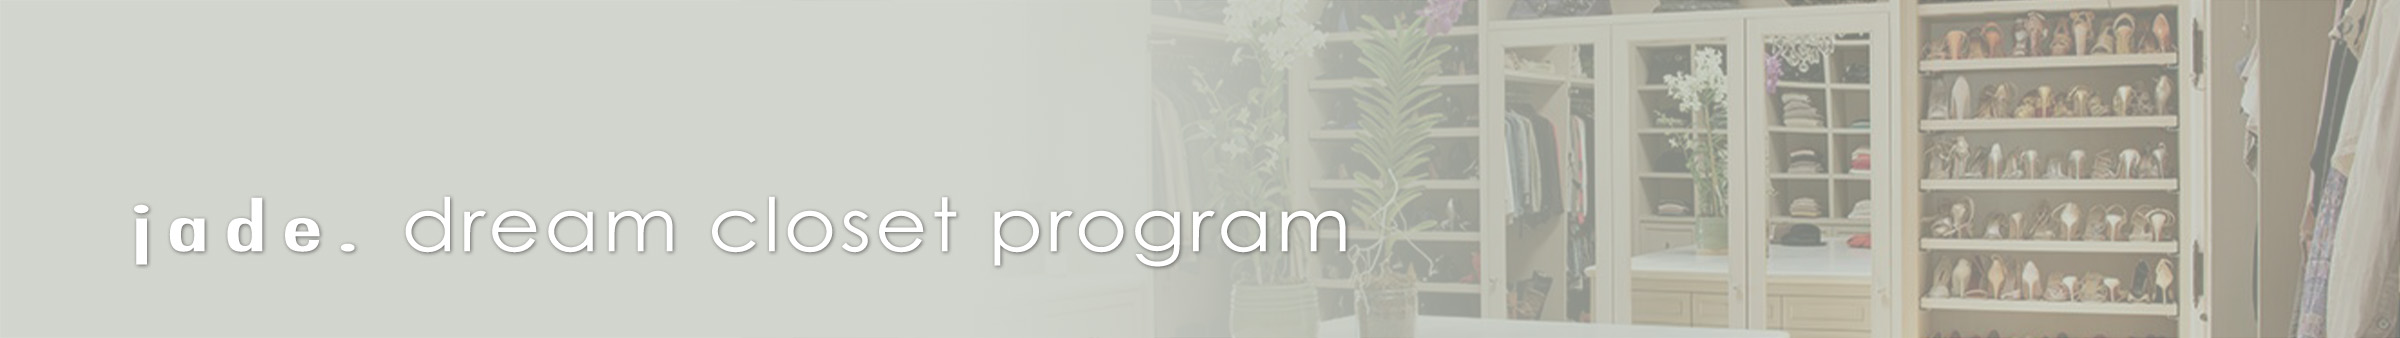 grey banner with image of a organized closet featuring a wall of shelves with organized shoes with the text "jade. dream closet program"